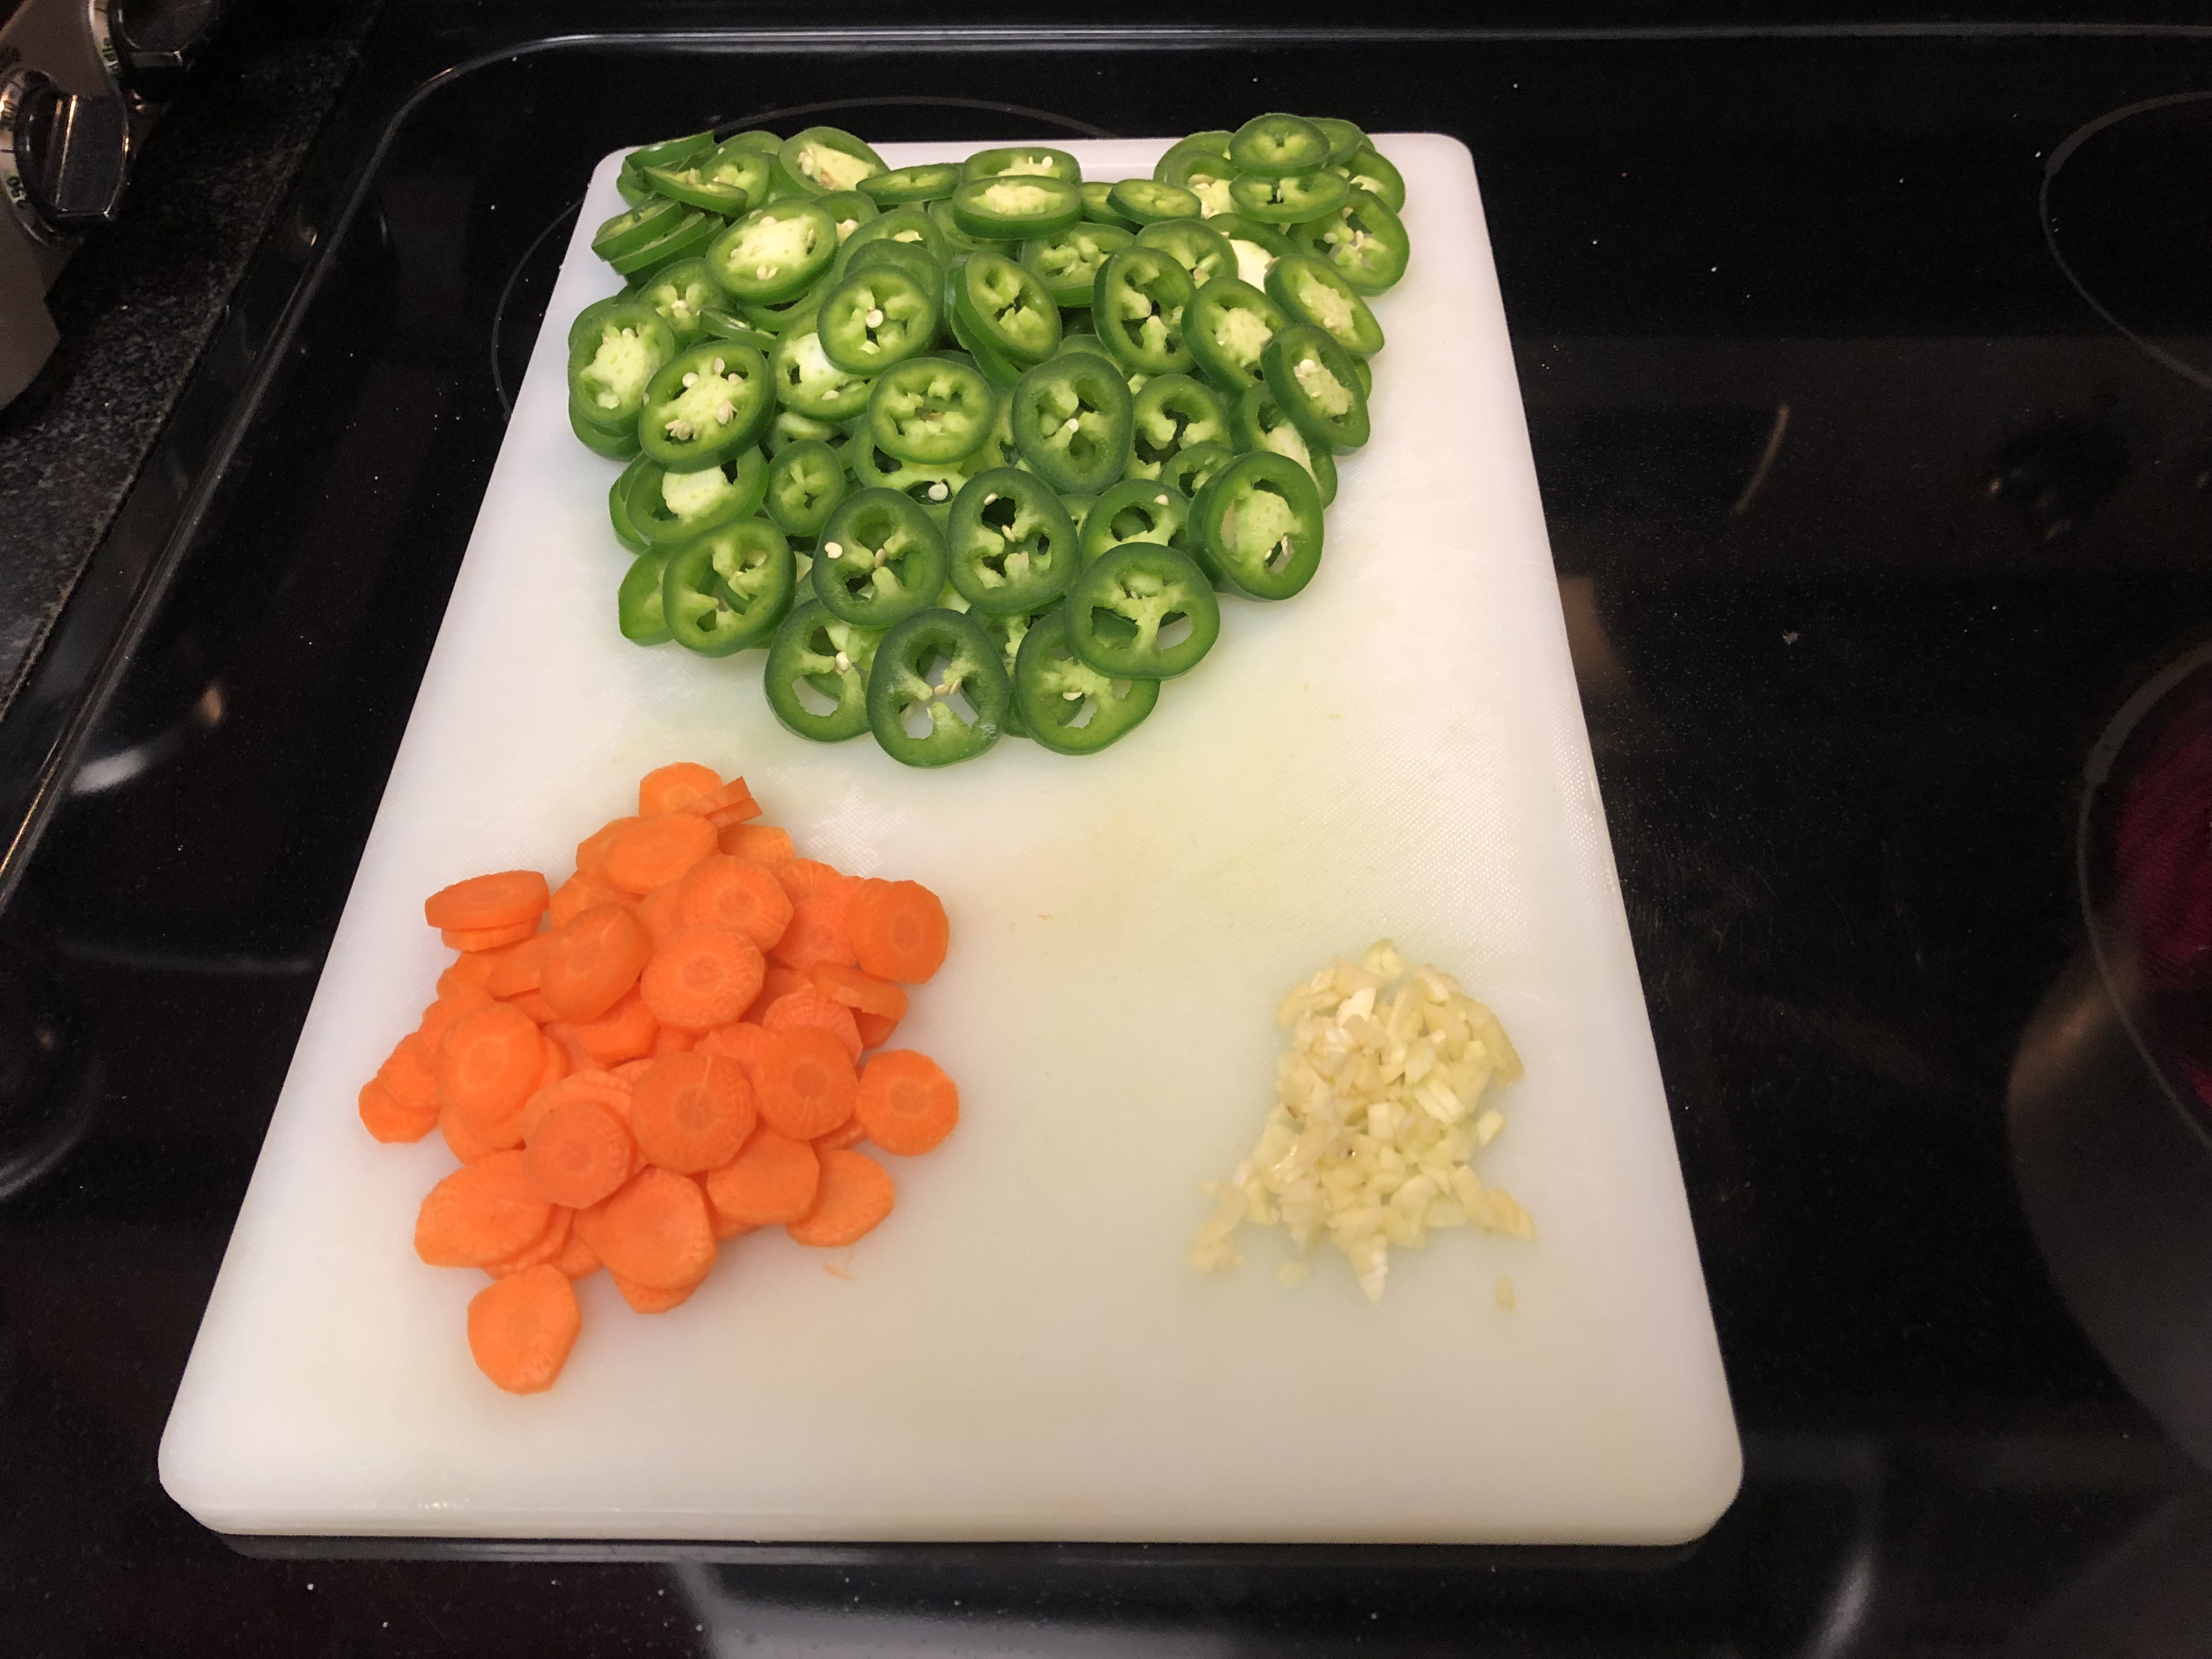 Cutting board showing prepared ingredients with sliced jalapenos and carrots and smashed garlic